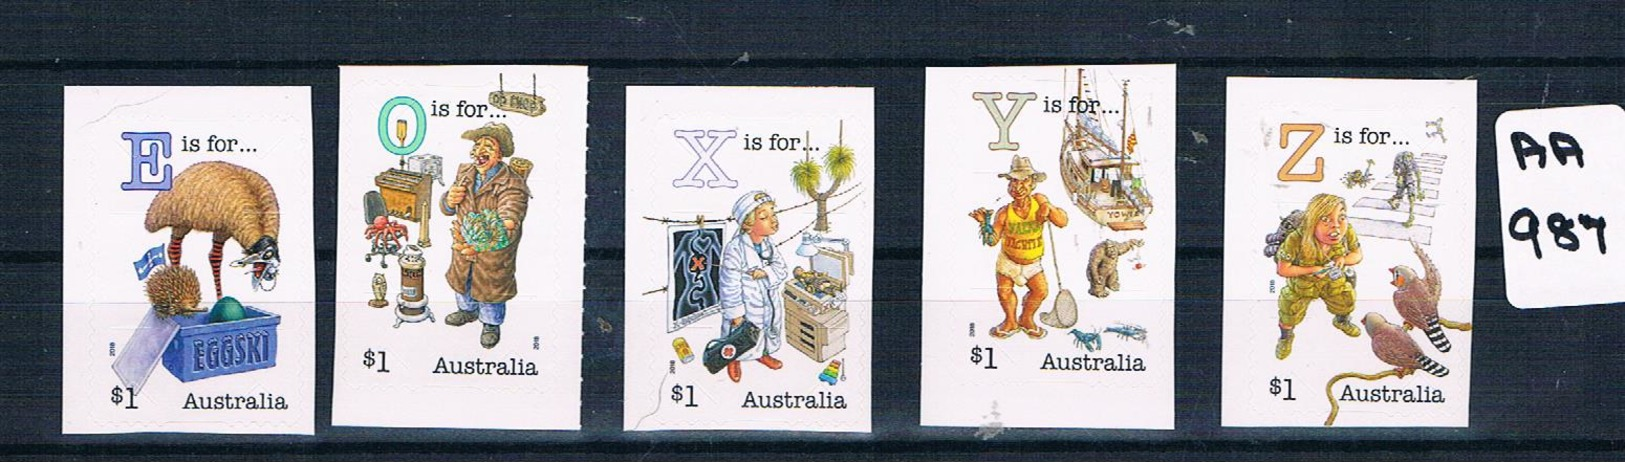 AUSTRALIA 2018  ALPHA PART 4  5 A/AD  EX BOOKLET  Muh AA987 - Mint Stamps